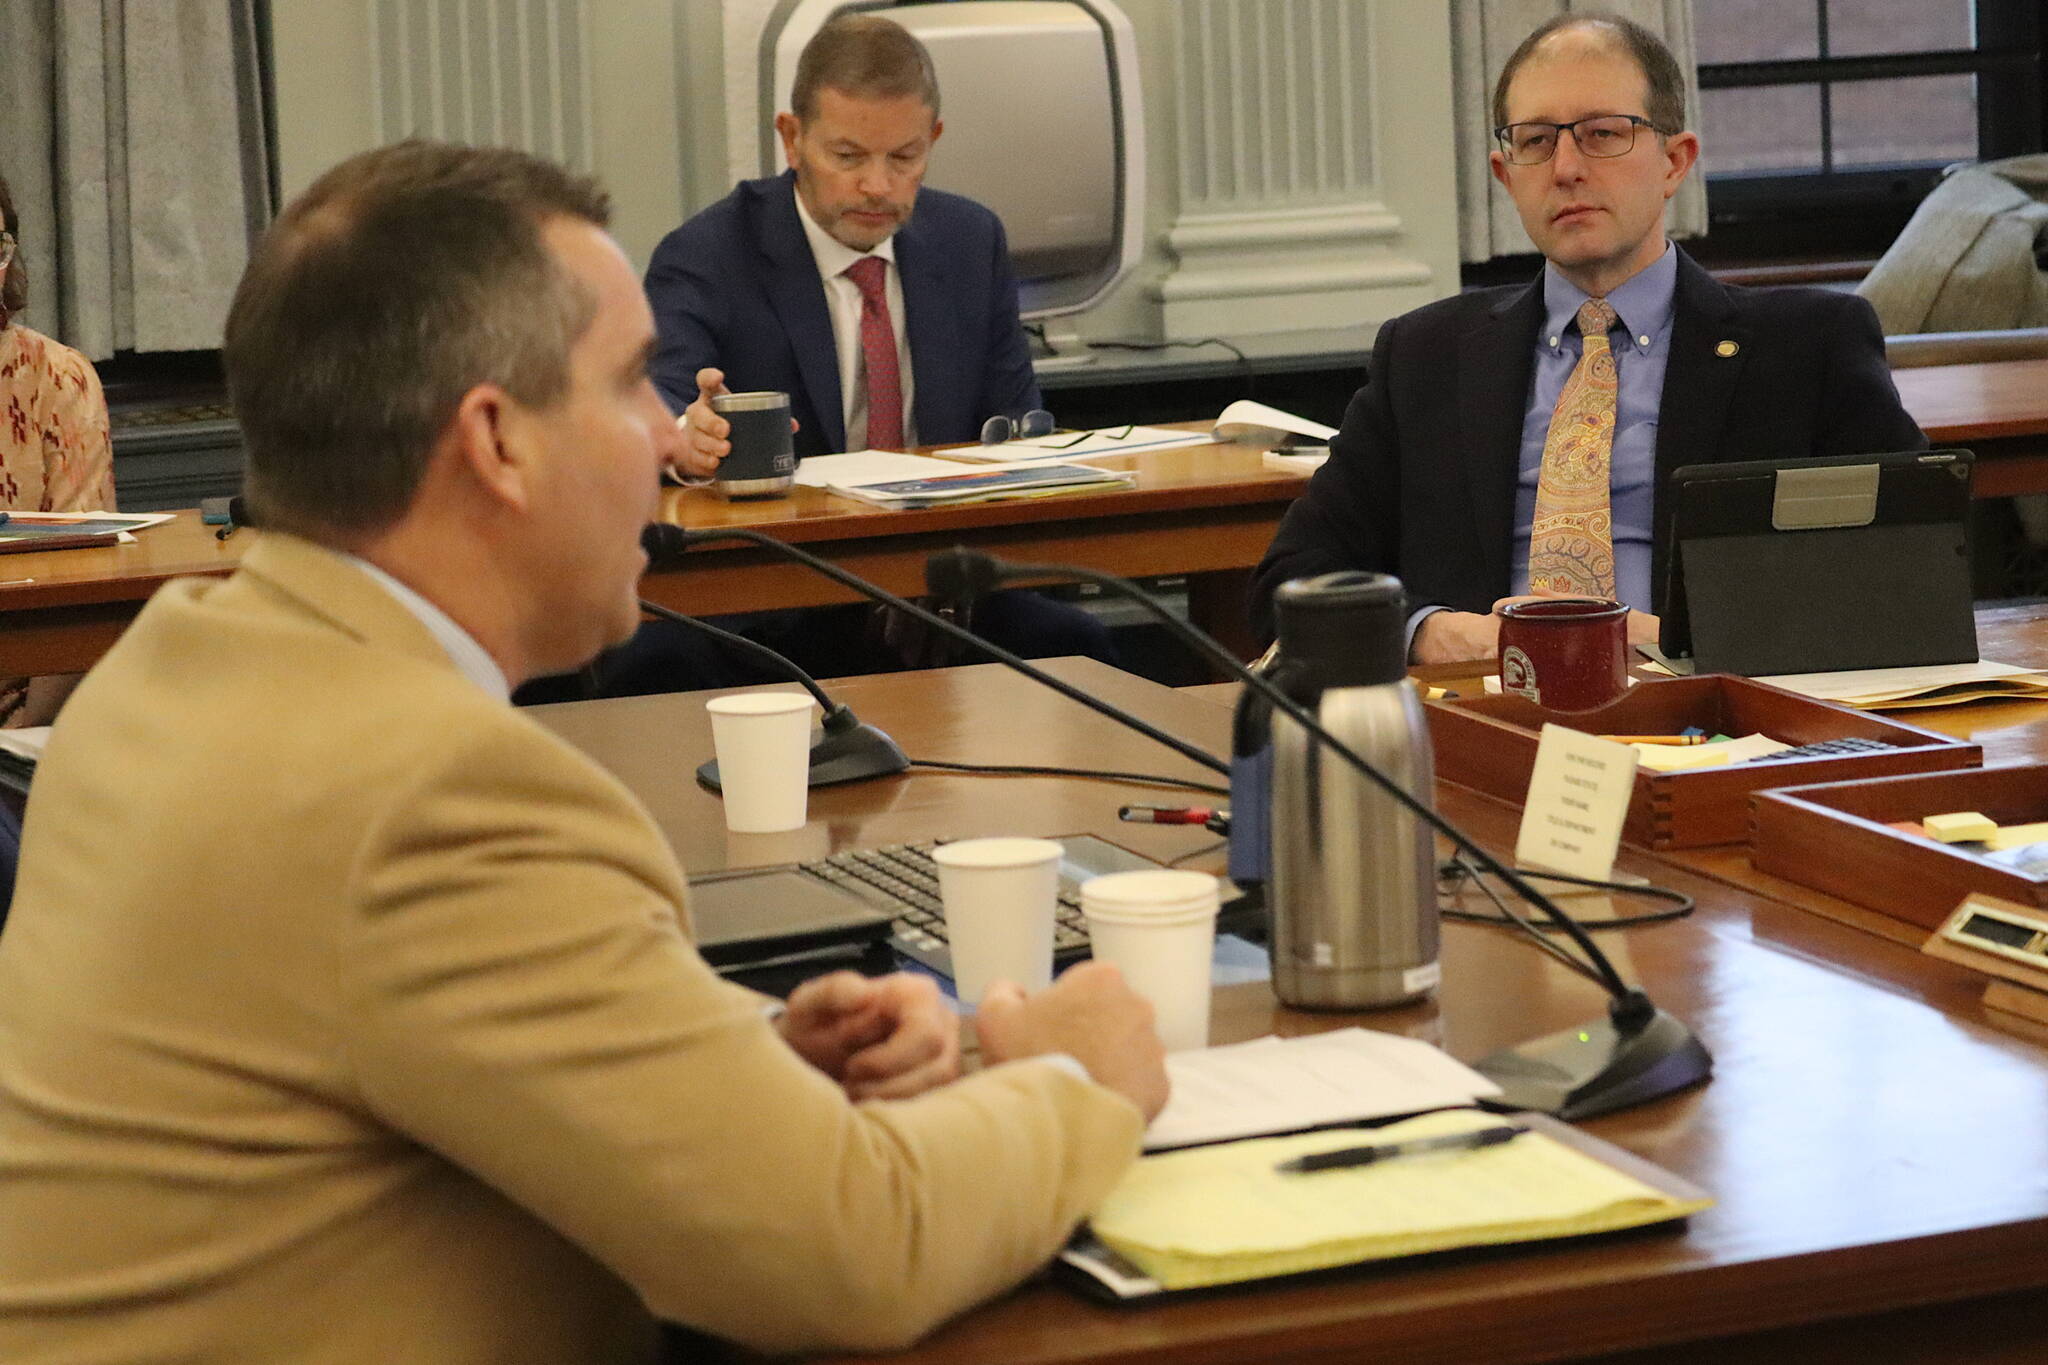 State Sen. Jesse Kiehl, D-Juneau, right, listens to an overview of Alaska’s past and projected oil production by Department of Natural Resources Commissioner John Boyle during Kiehl’s first meeting as a member of the Senate Finance Committee on Wednesday. (Mark Sabbatini / Juneau Empire)